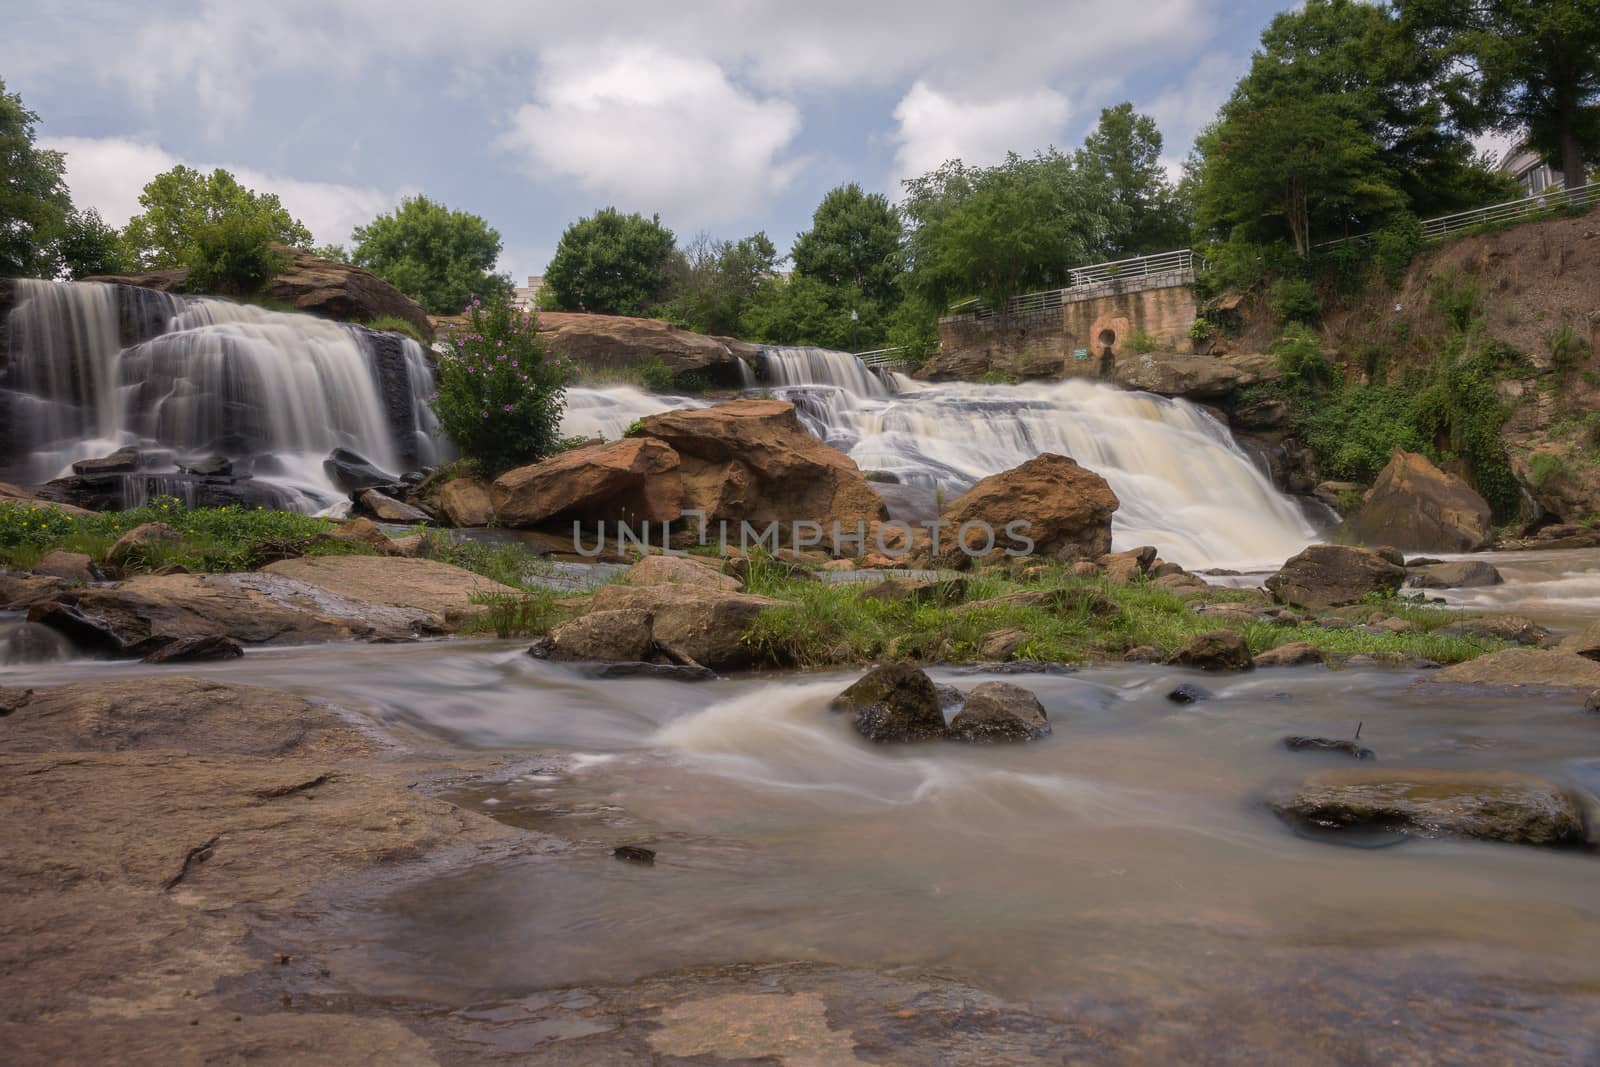 Long exposure captures the slow flowing Reedy River at Falls Park